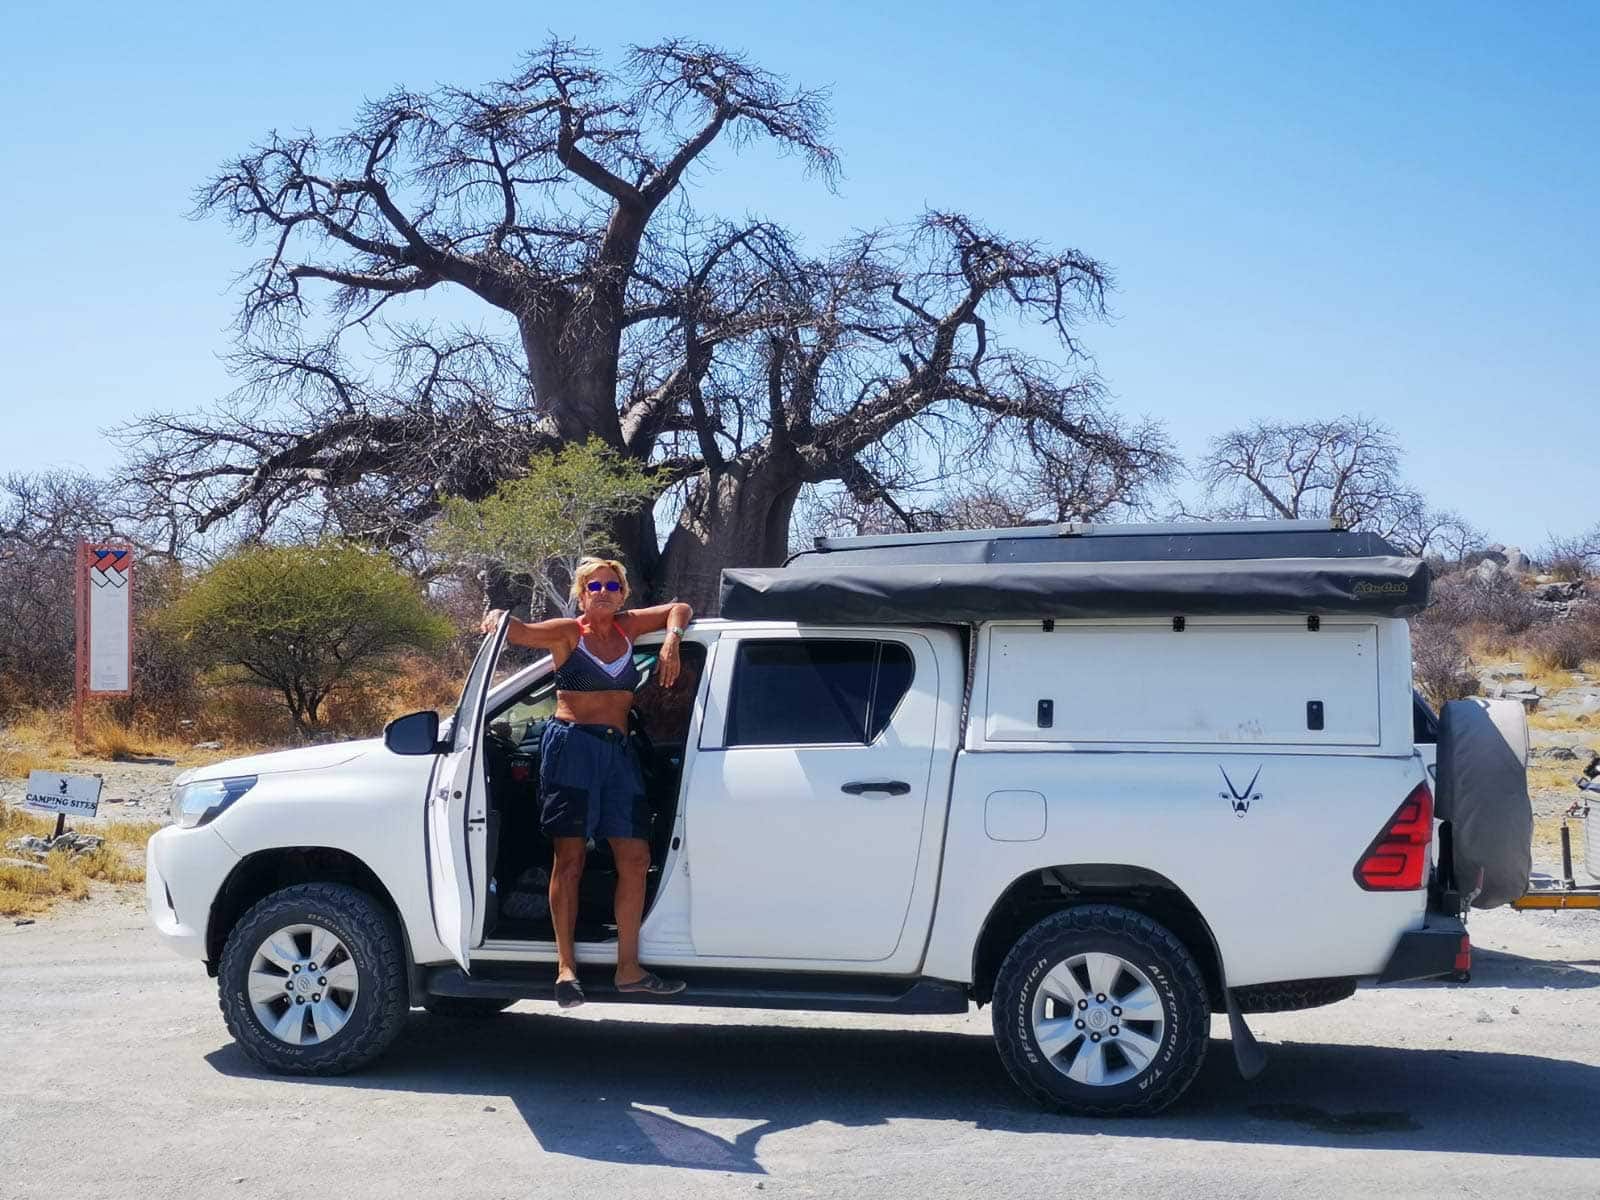 Christine-at-Baines-Baobabs stood on the sidestep of her 4x4 with a baobab tree in the background 